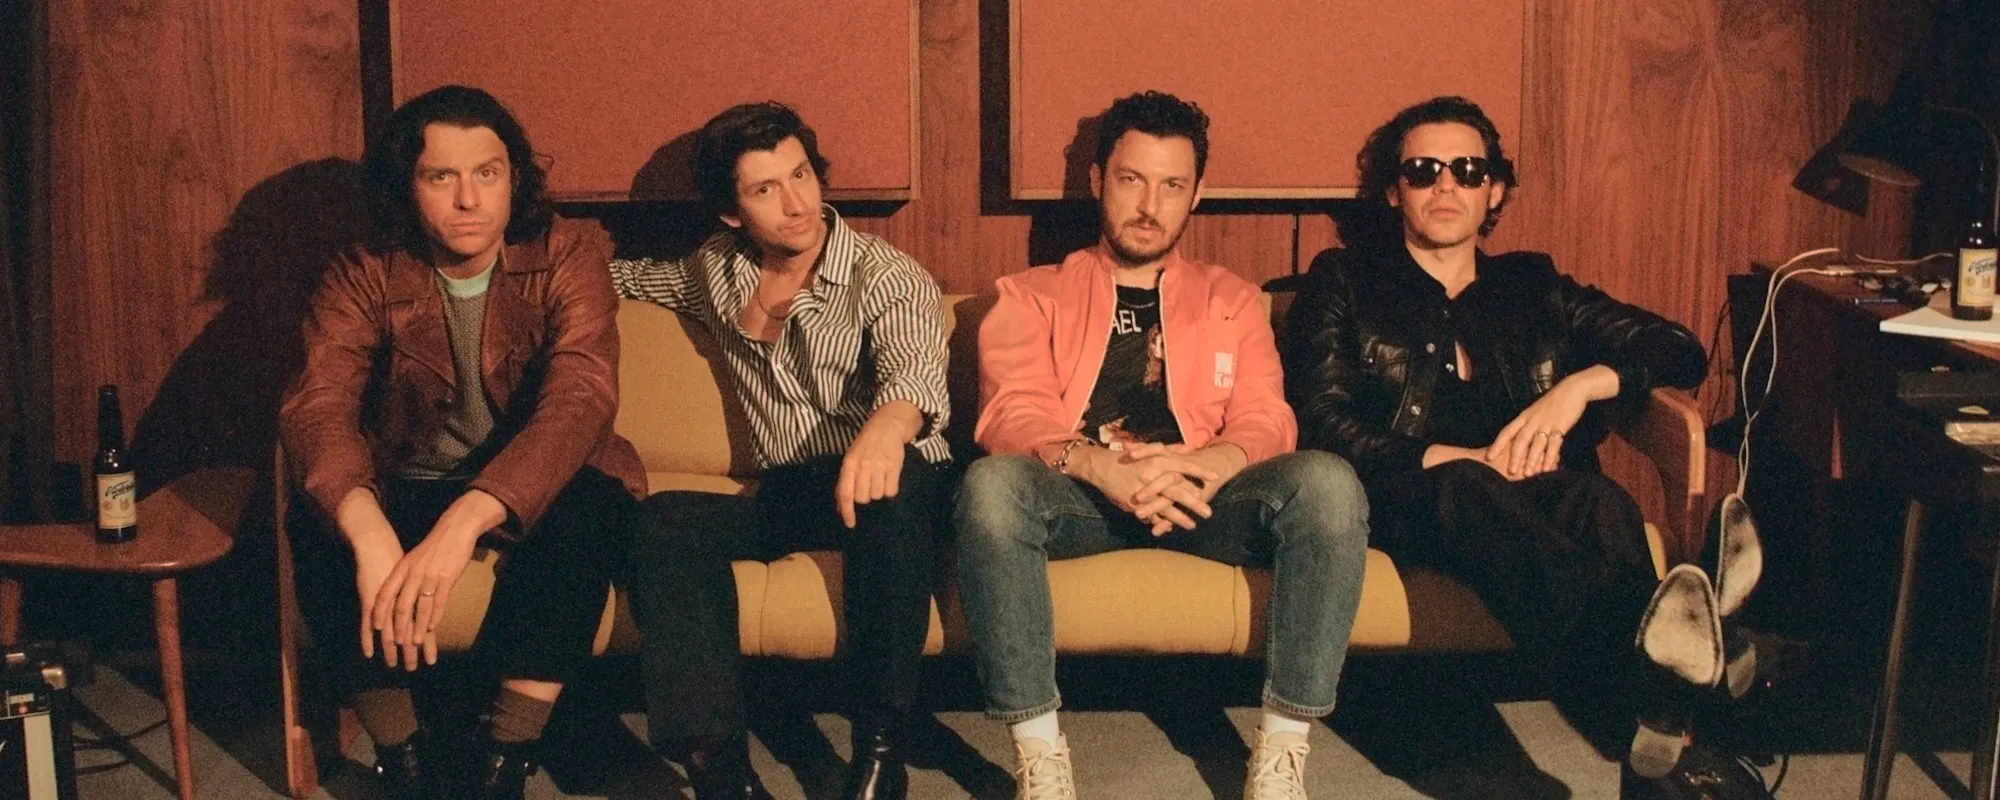 Behind the History and Meaning of the Band Name Arctic Monkeys